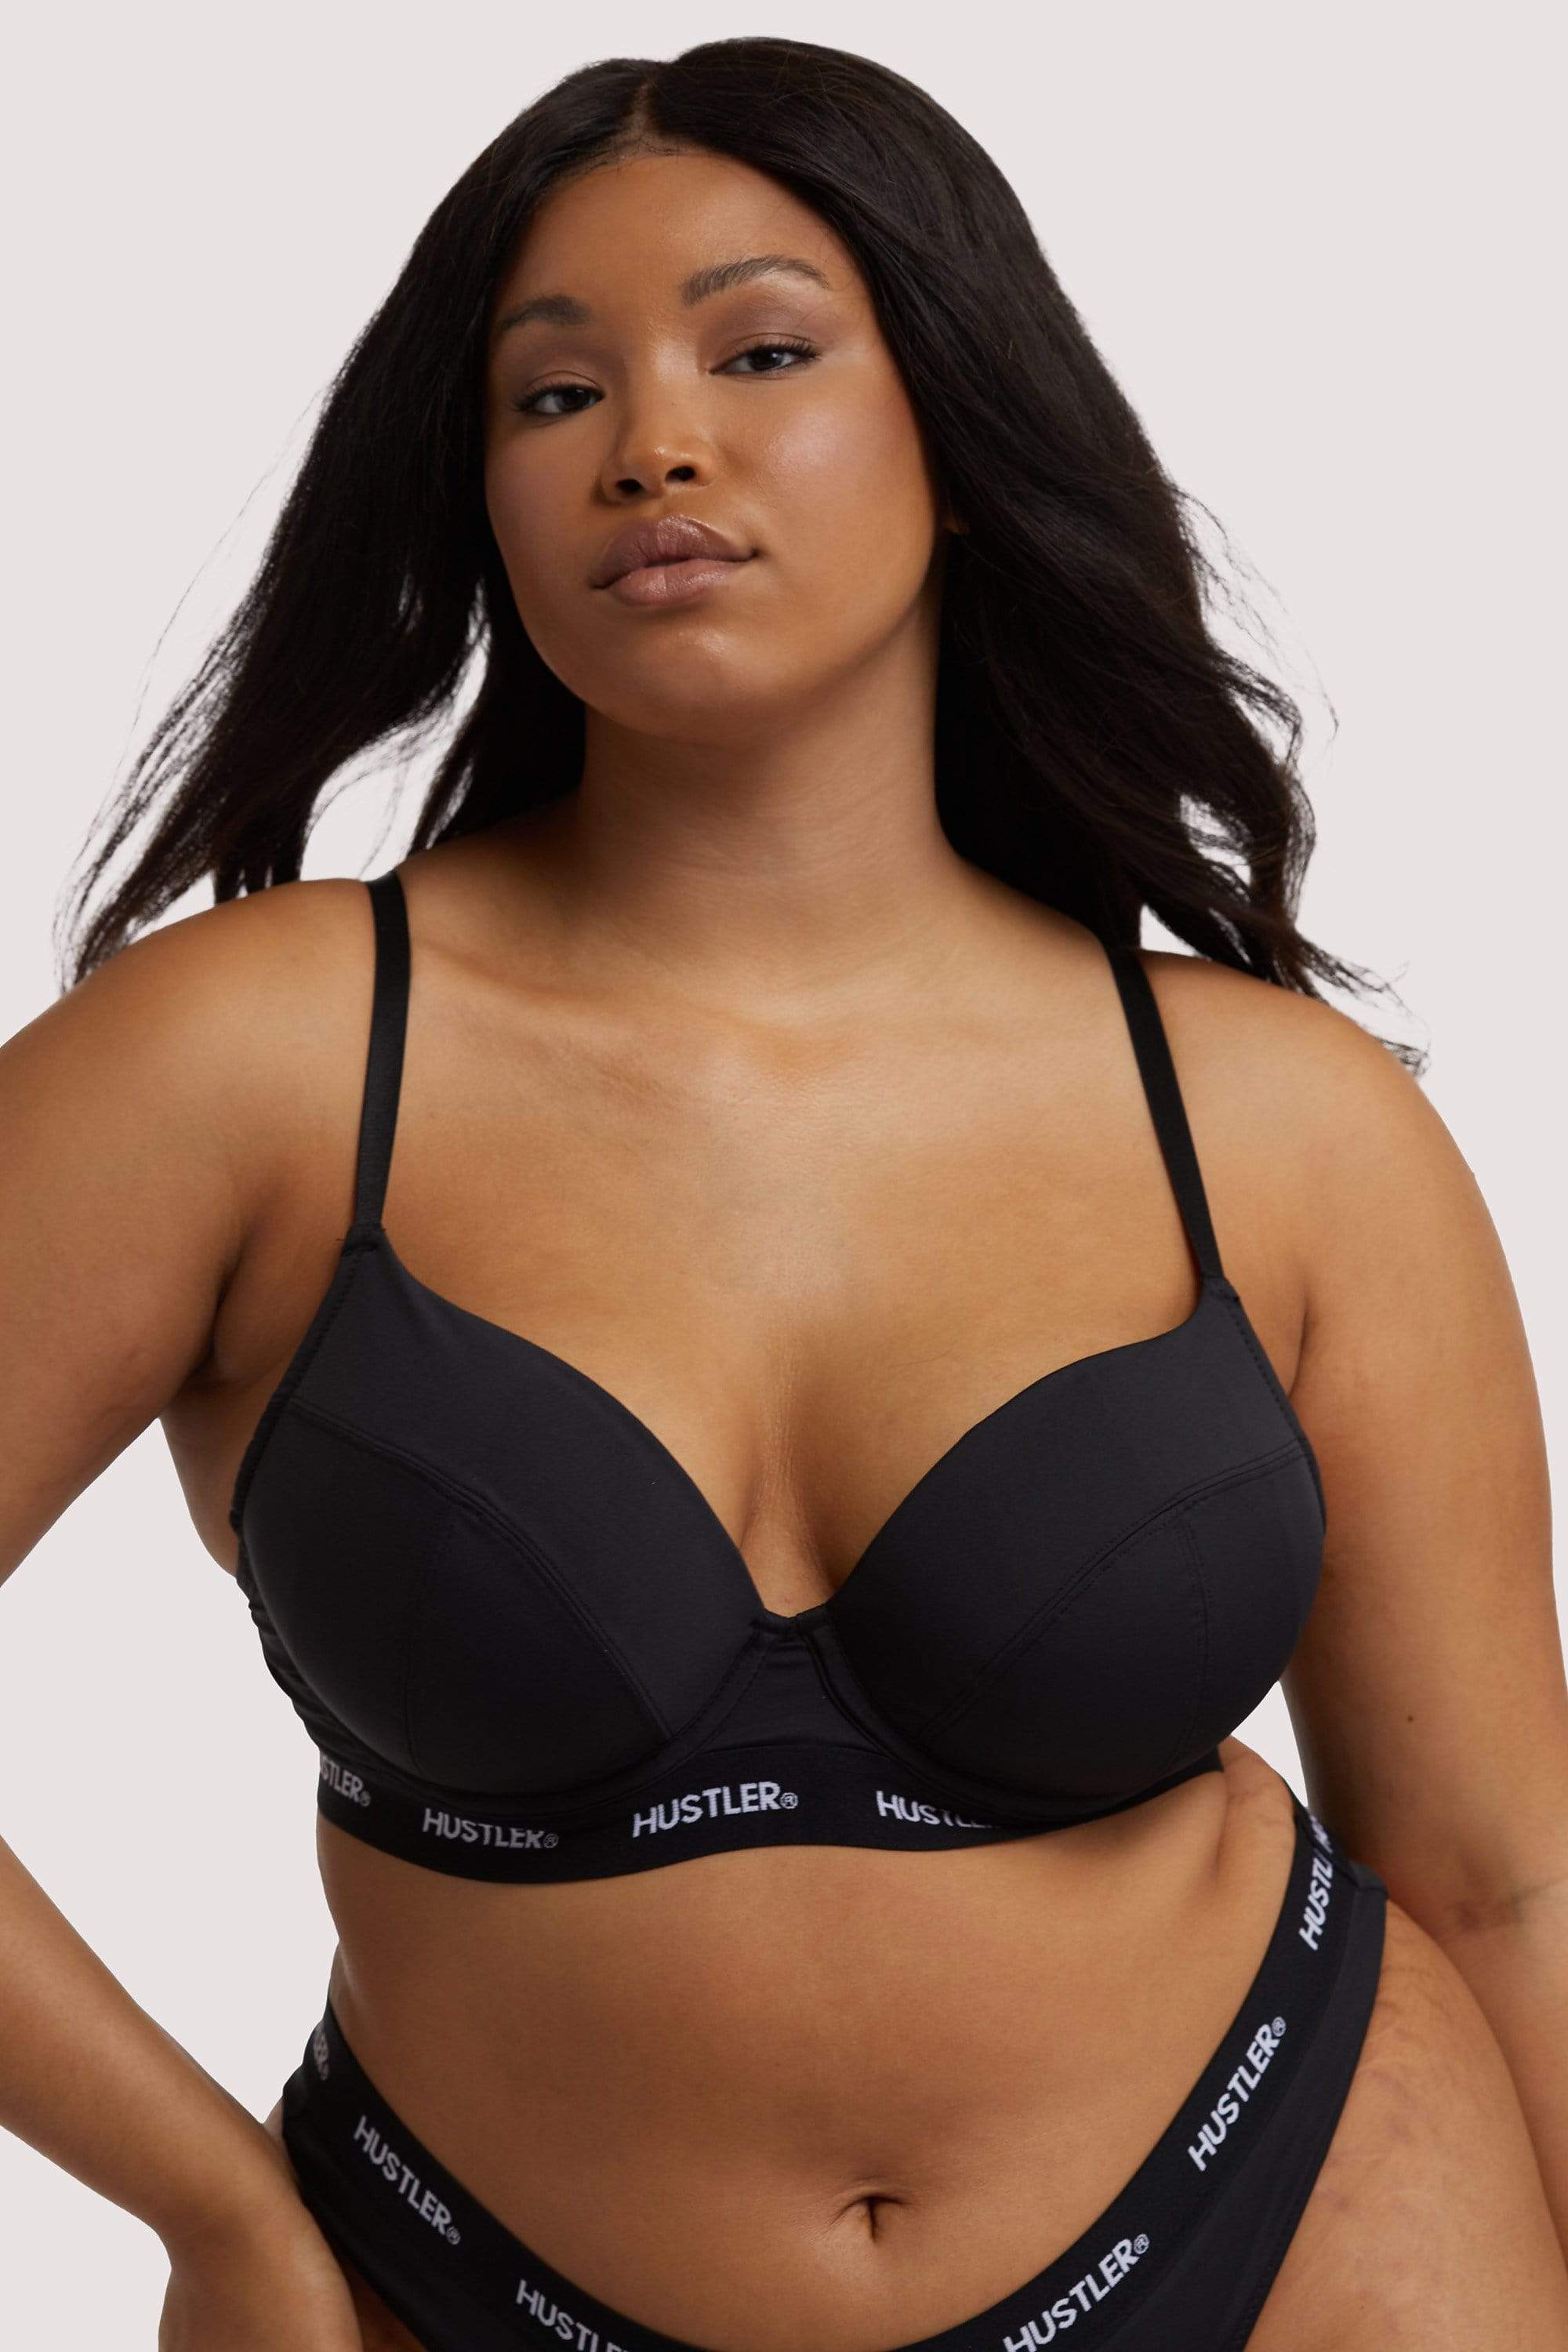 RIPT Fusion Does For Men What Push-Up Bras Have Done For Women